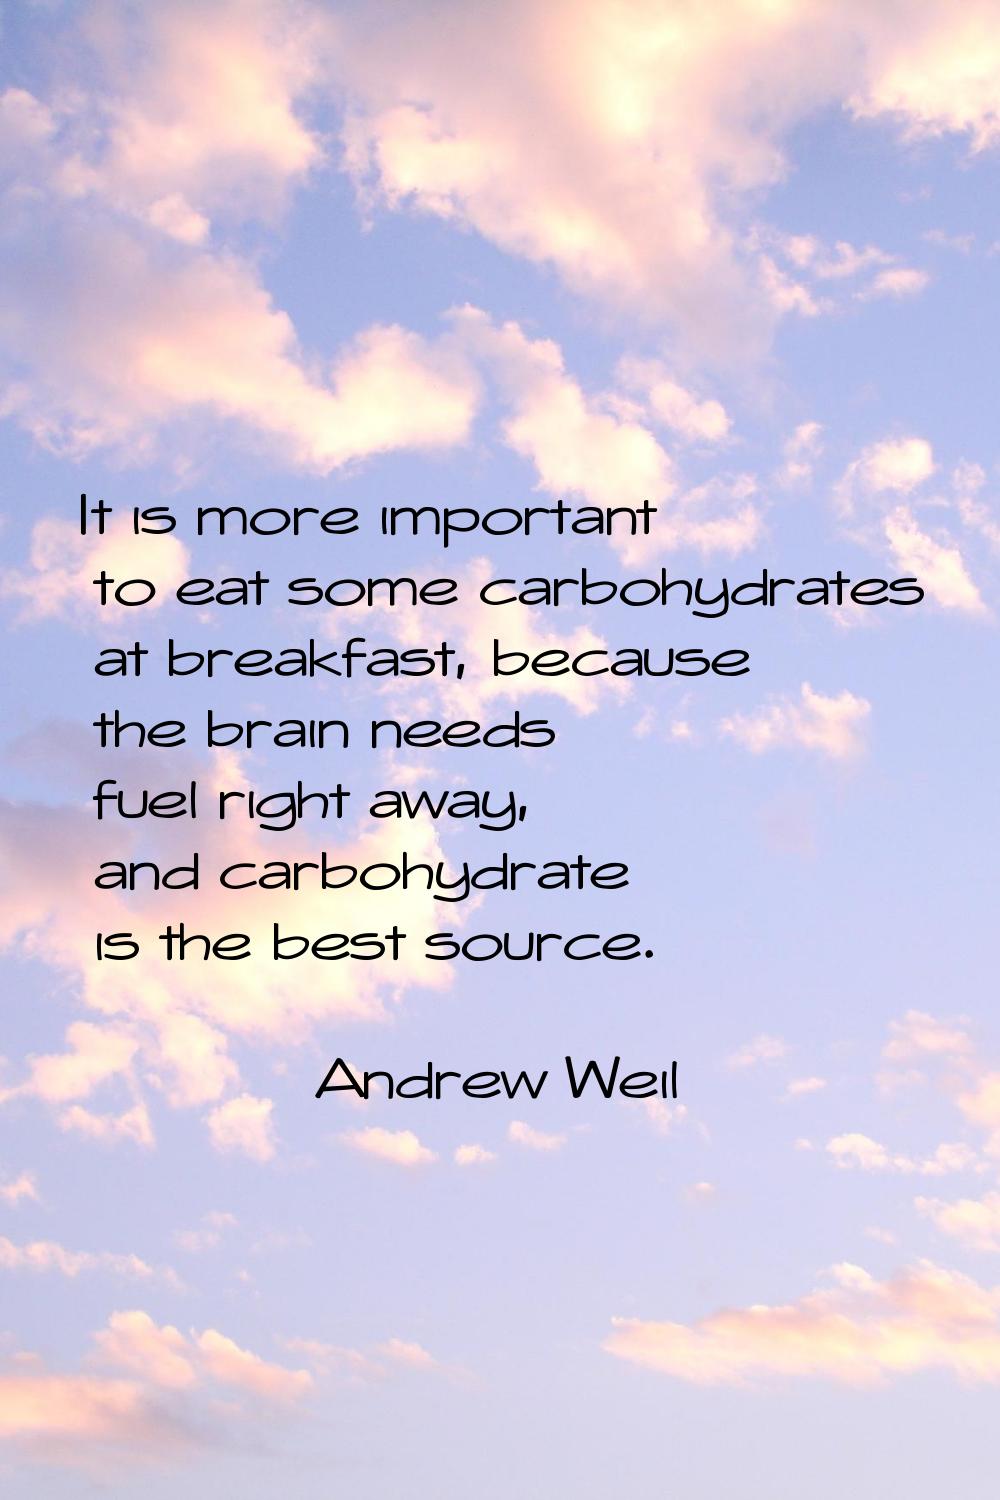 It is more important to eat some carbohydrates at breakfast, because the brain needs fuel right awa